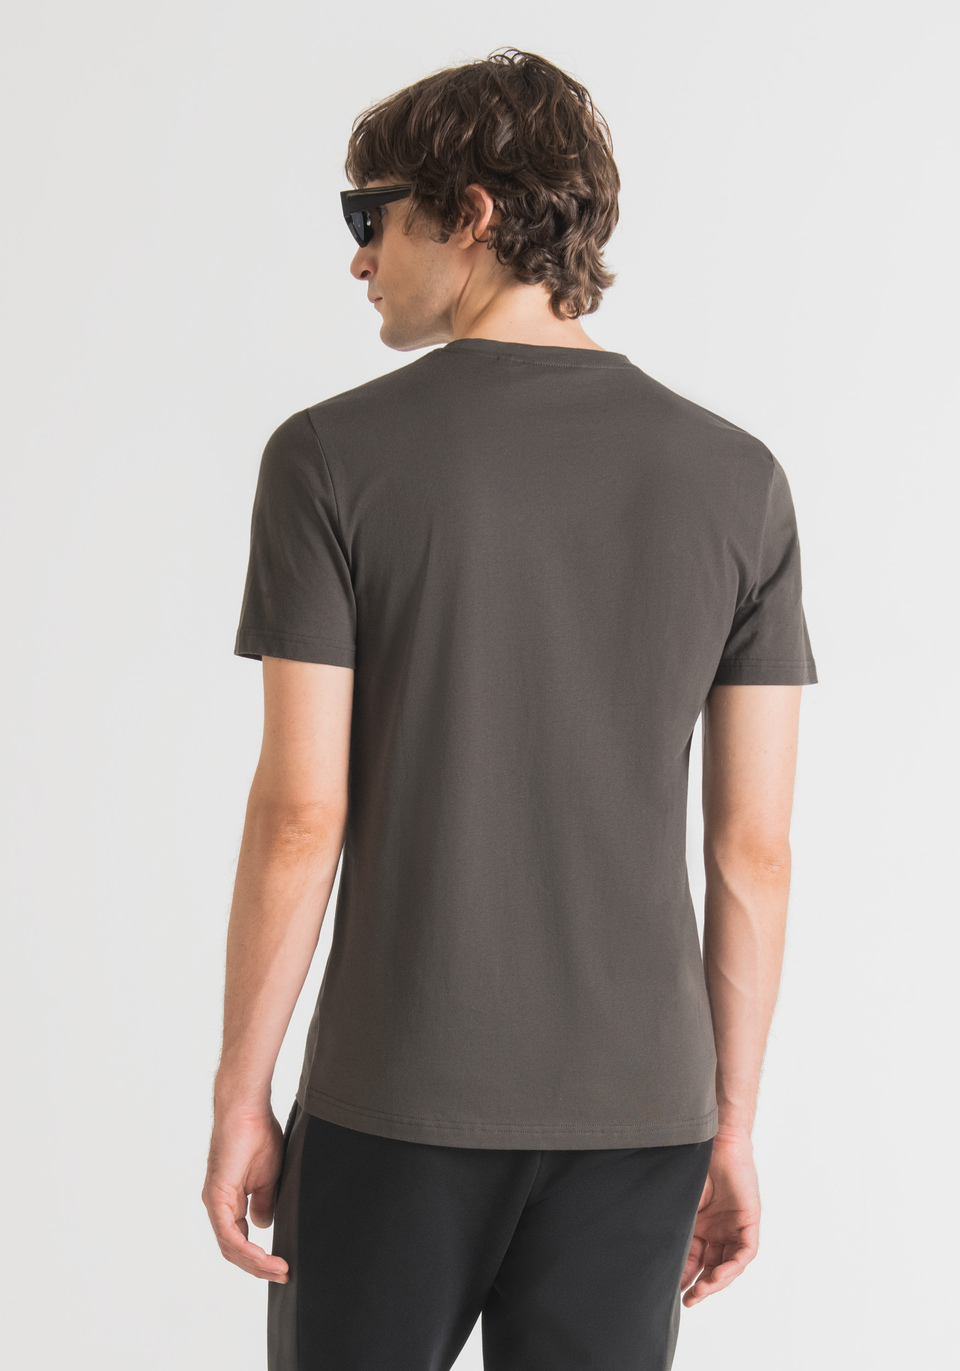 SLIM FIT T-SHIRT IN COTTON JERSEY WITH EMBOSSED TONE-ON-TONE LOGO - Antony Morato Online Shop